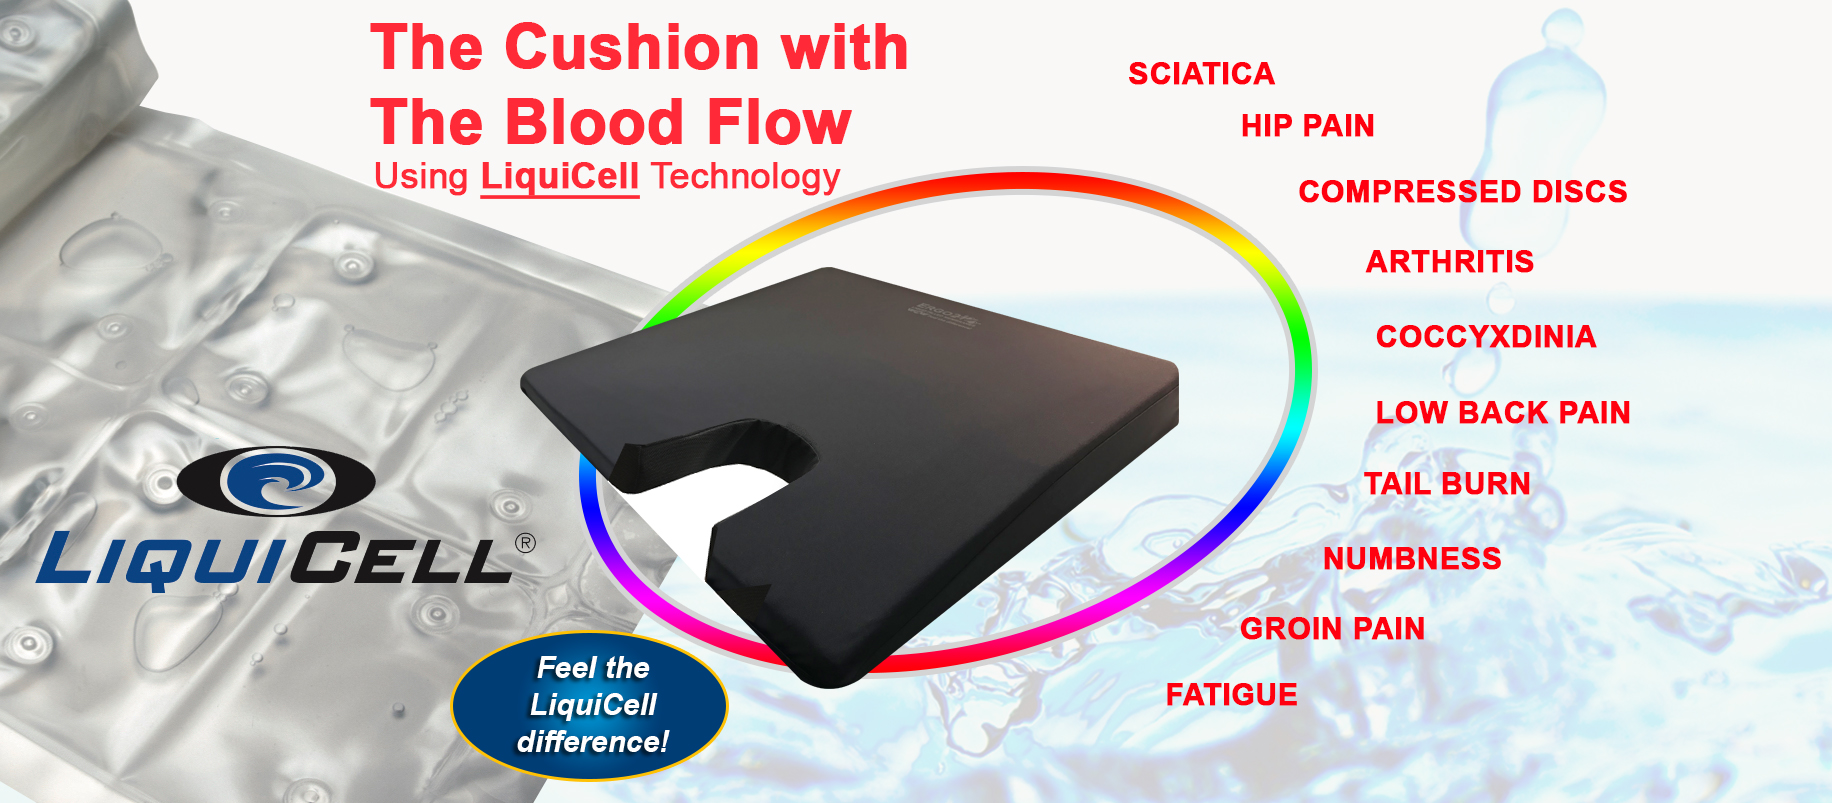 Best Wheelchair Cushion - Liquicell improves blood flow 